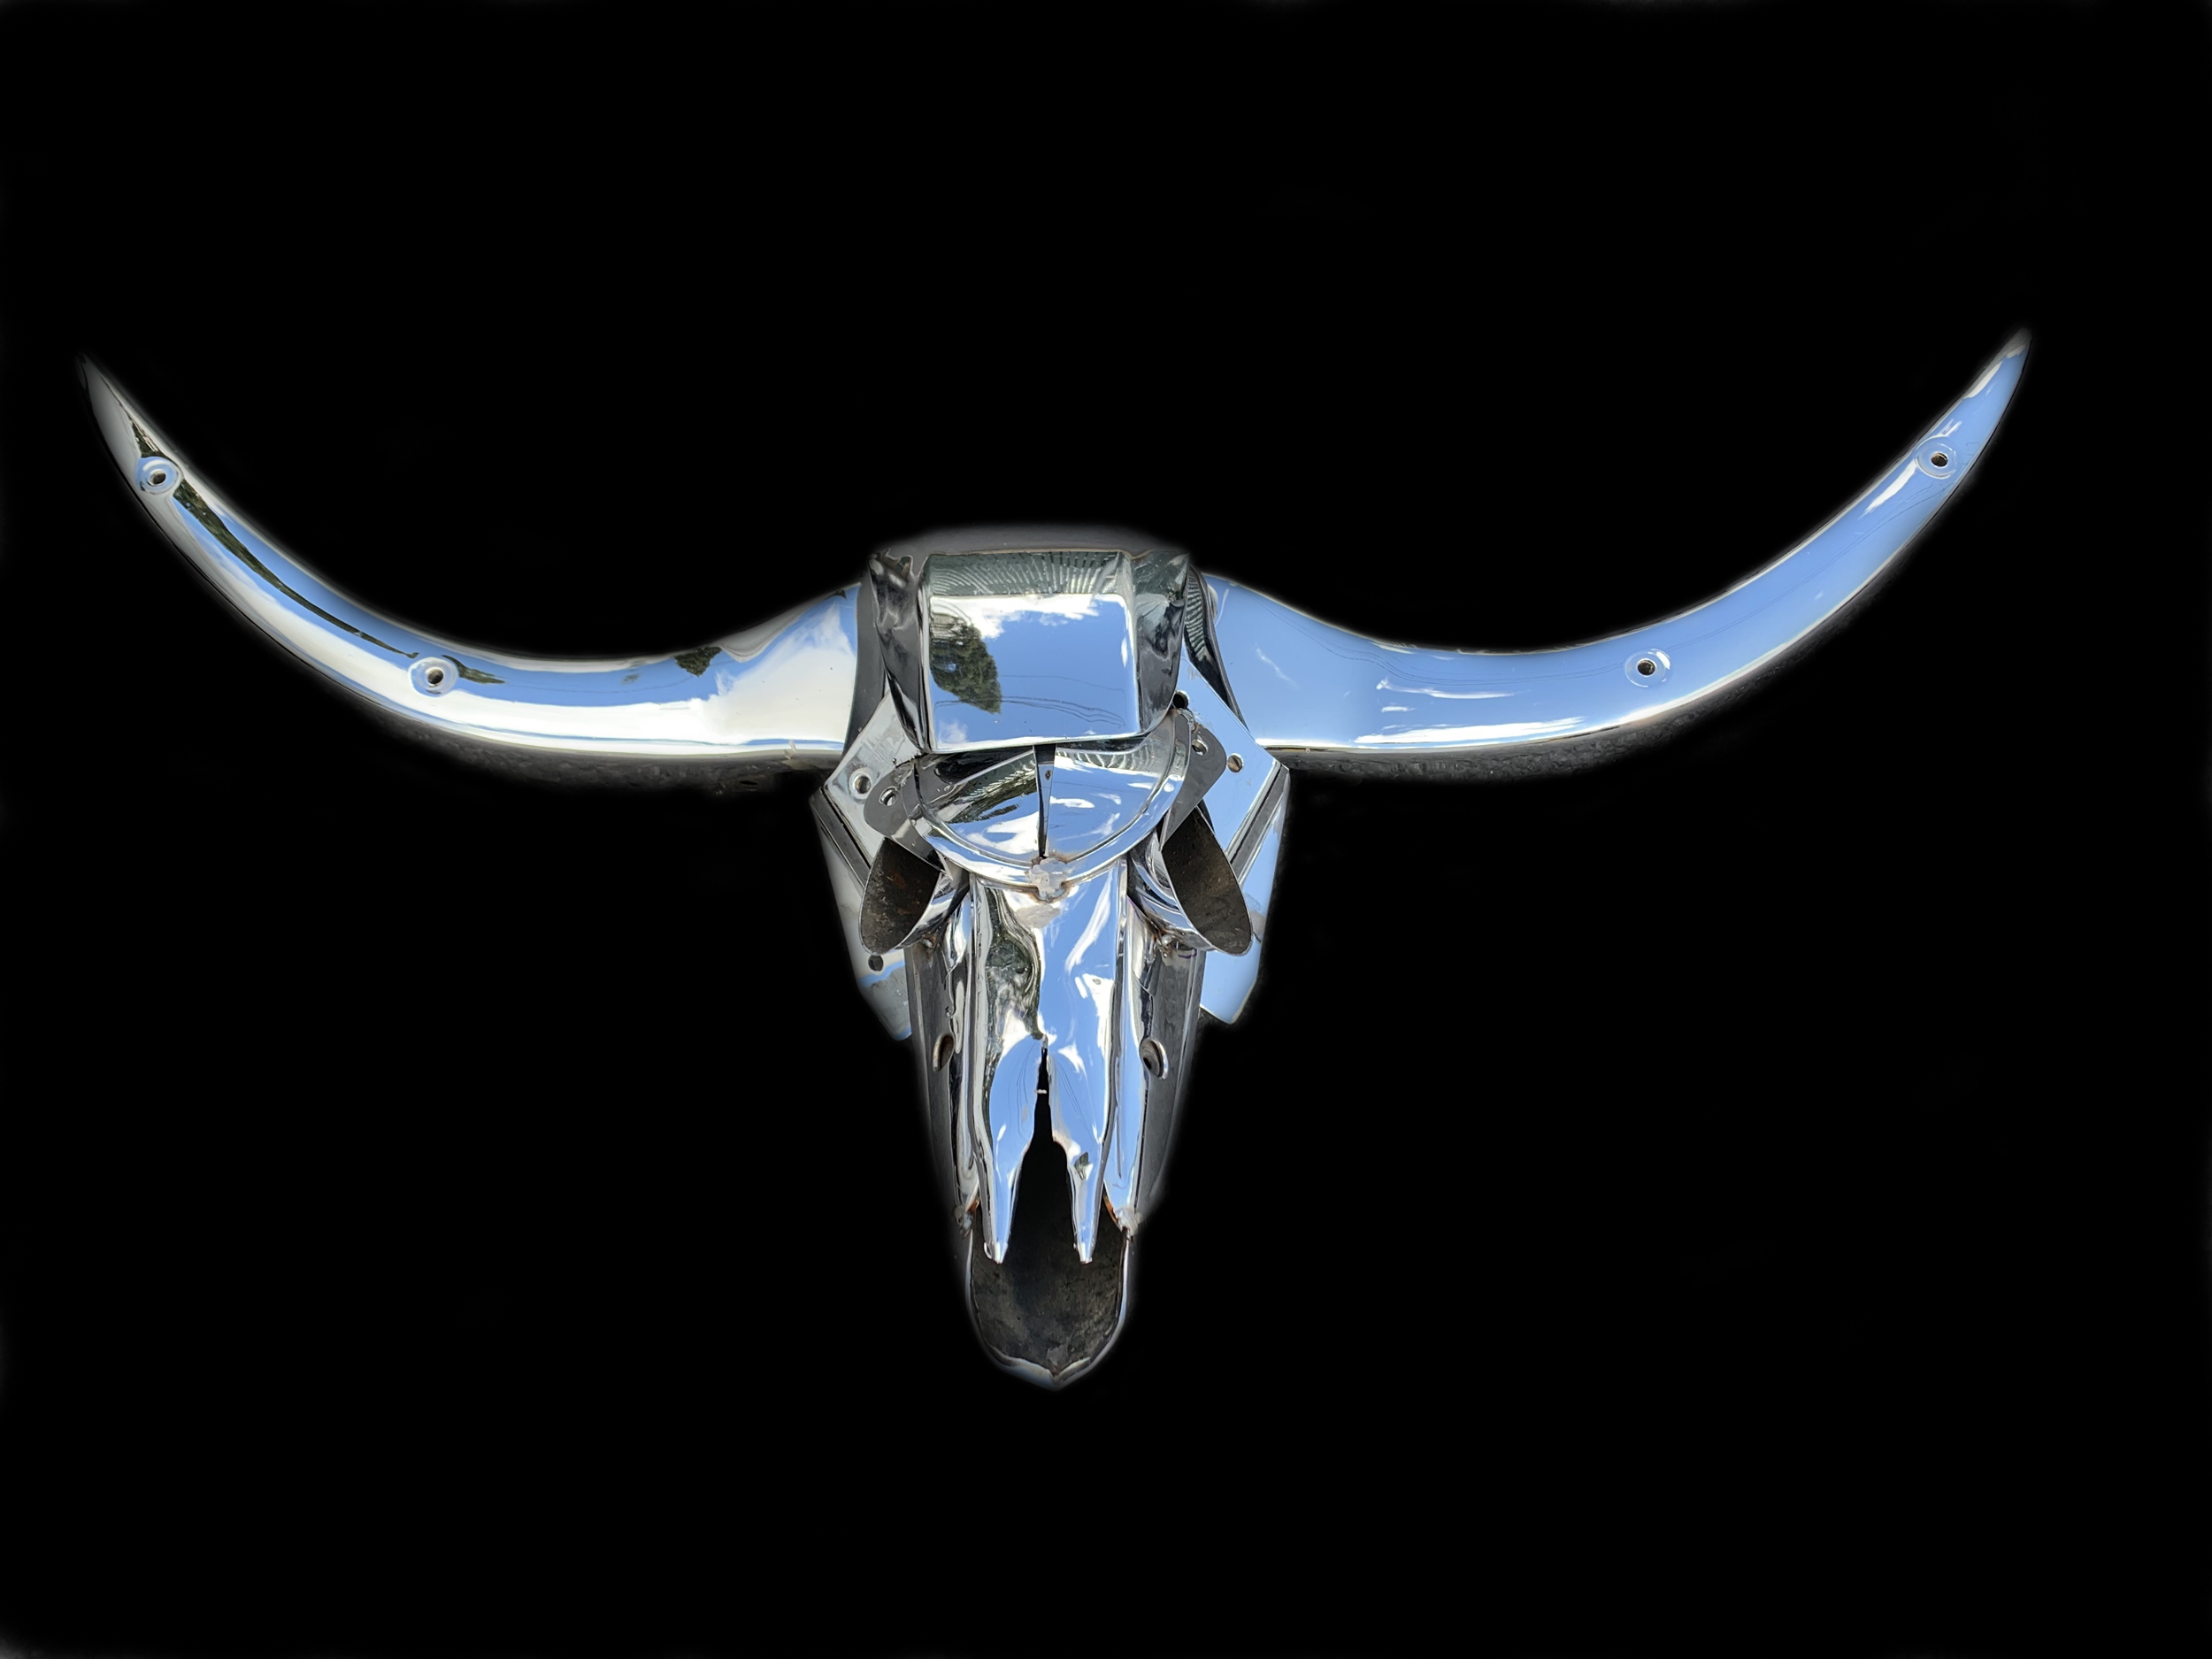 "Buchis the Bull" - found object and welded steel sculpture by Jud Turner, copyright 2020